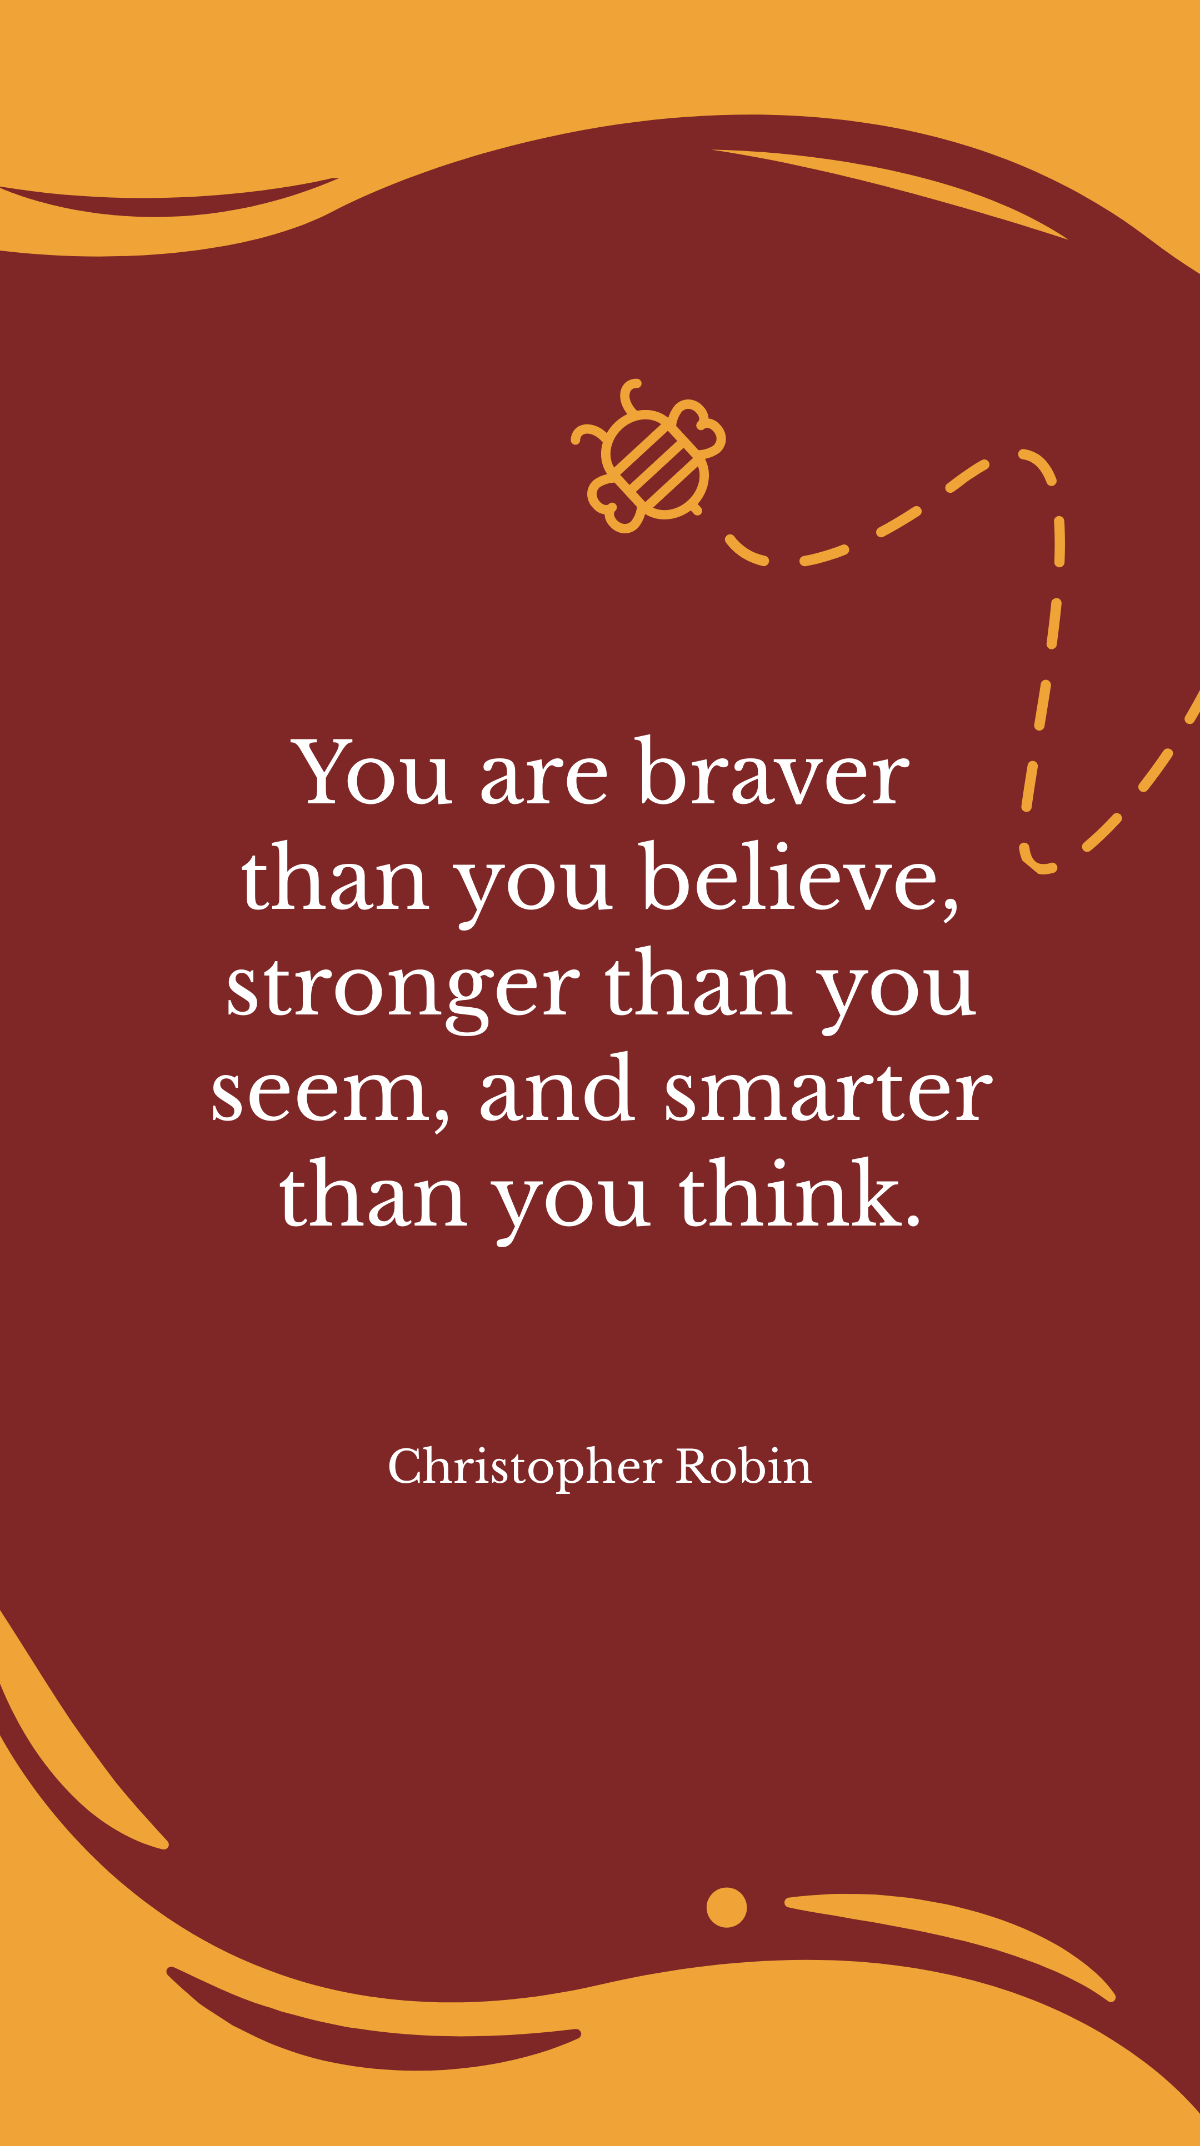 Christopher Robin - “You are braver than you believe, stronger than you seem, and smarter than you think.” Template